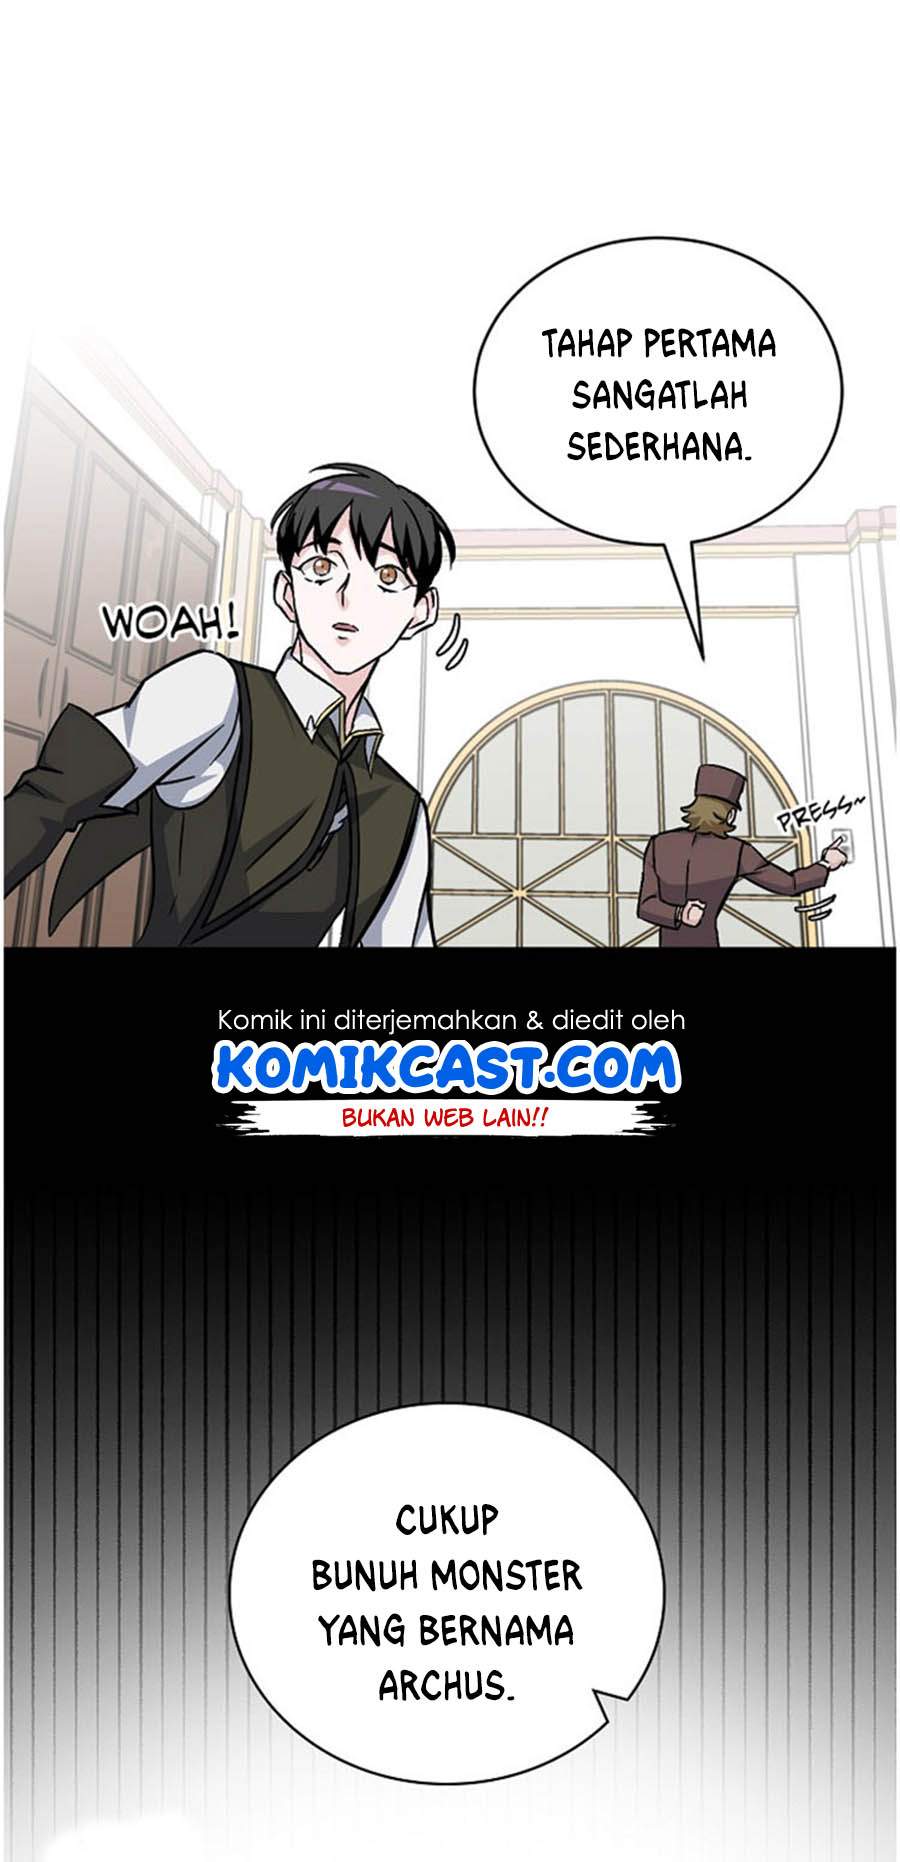 Leveling Up, By Only Eating! (Gourmet Gaming) Chapter 24 - 475